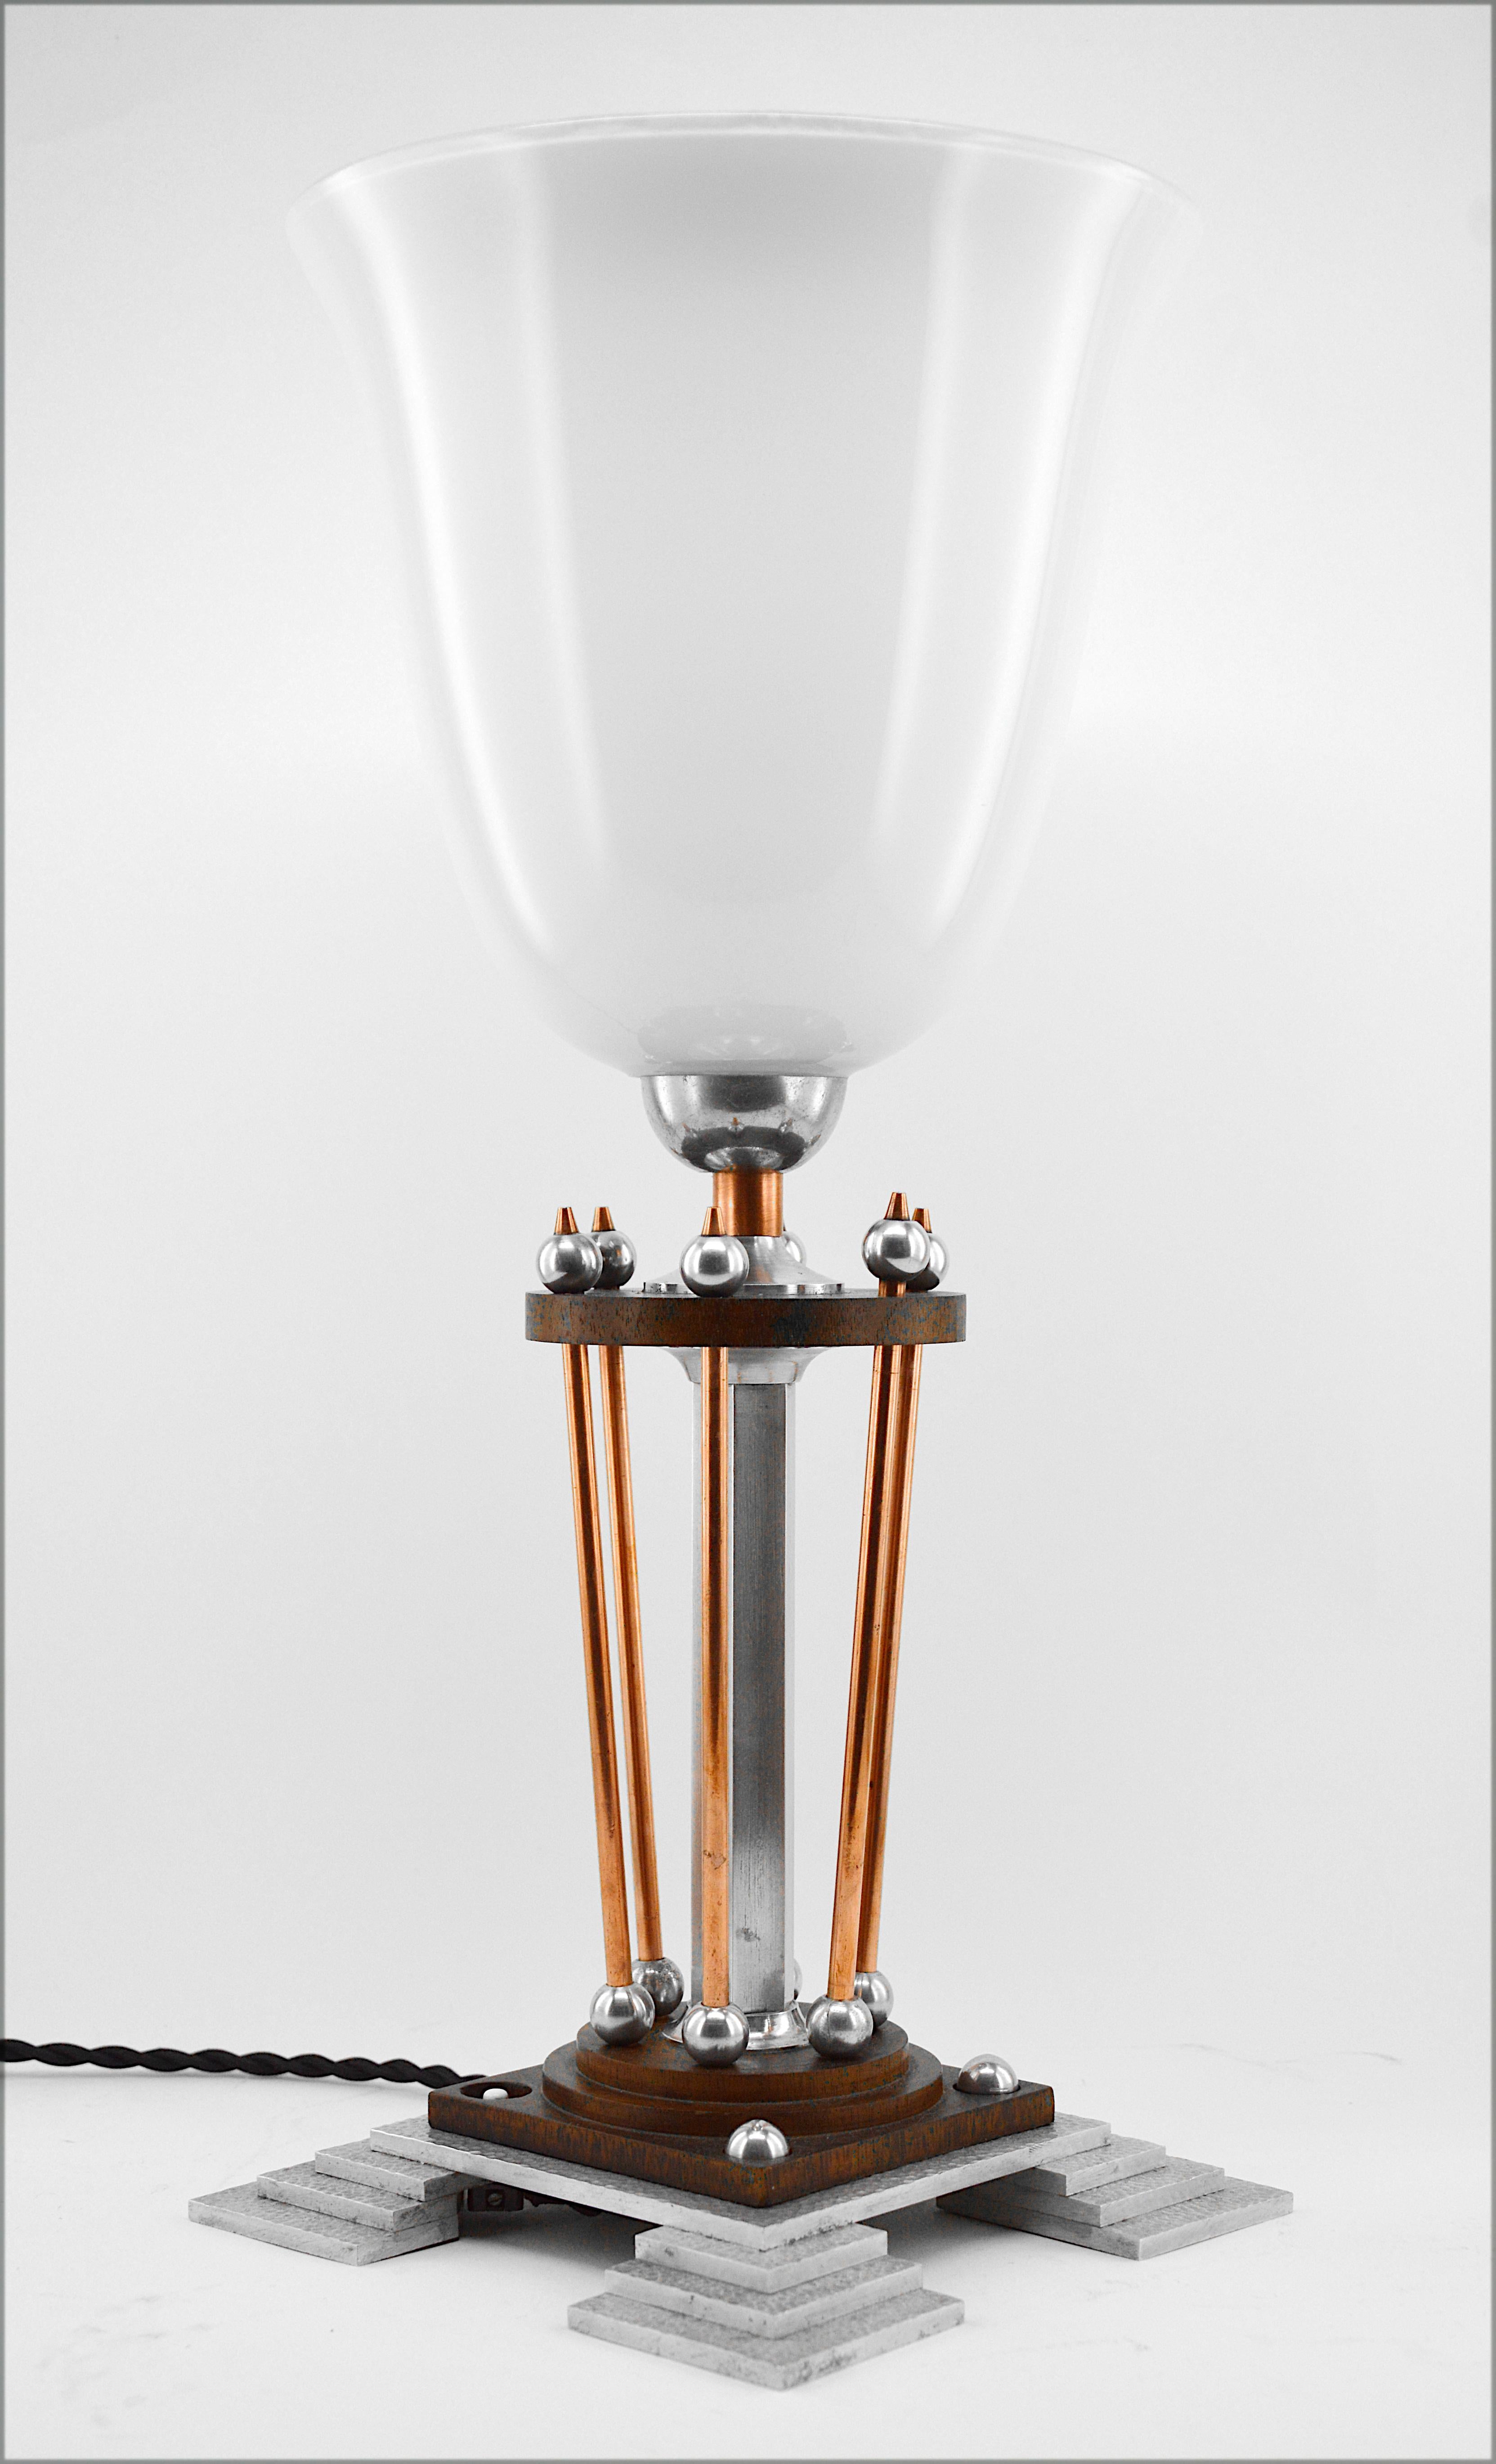 French Art Deco table lamp, France, 1920s. Measures: height 17.7